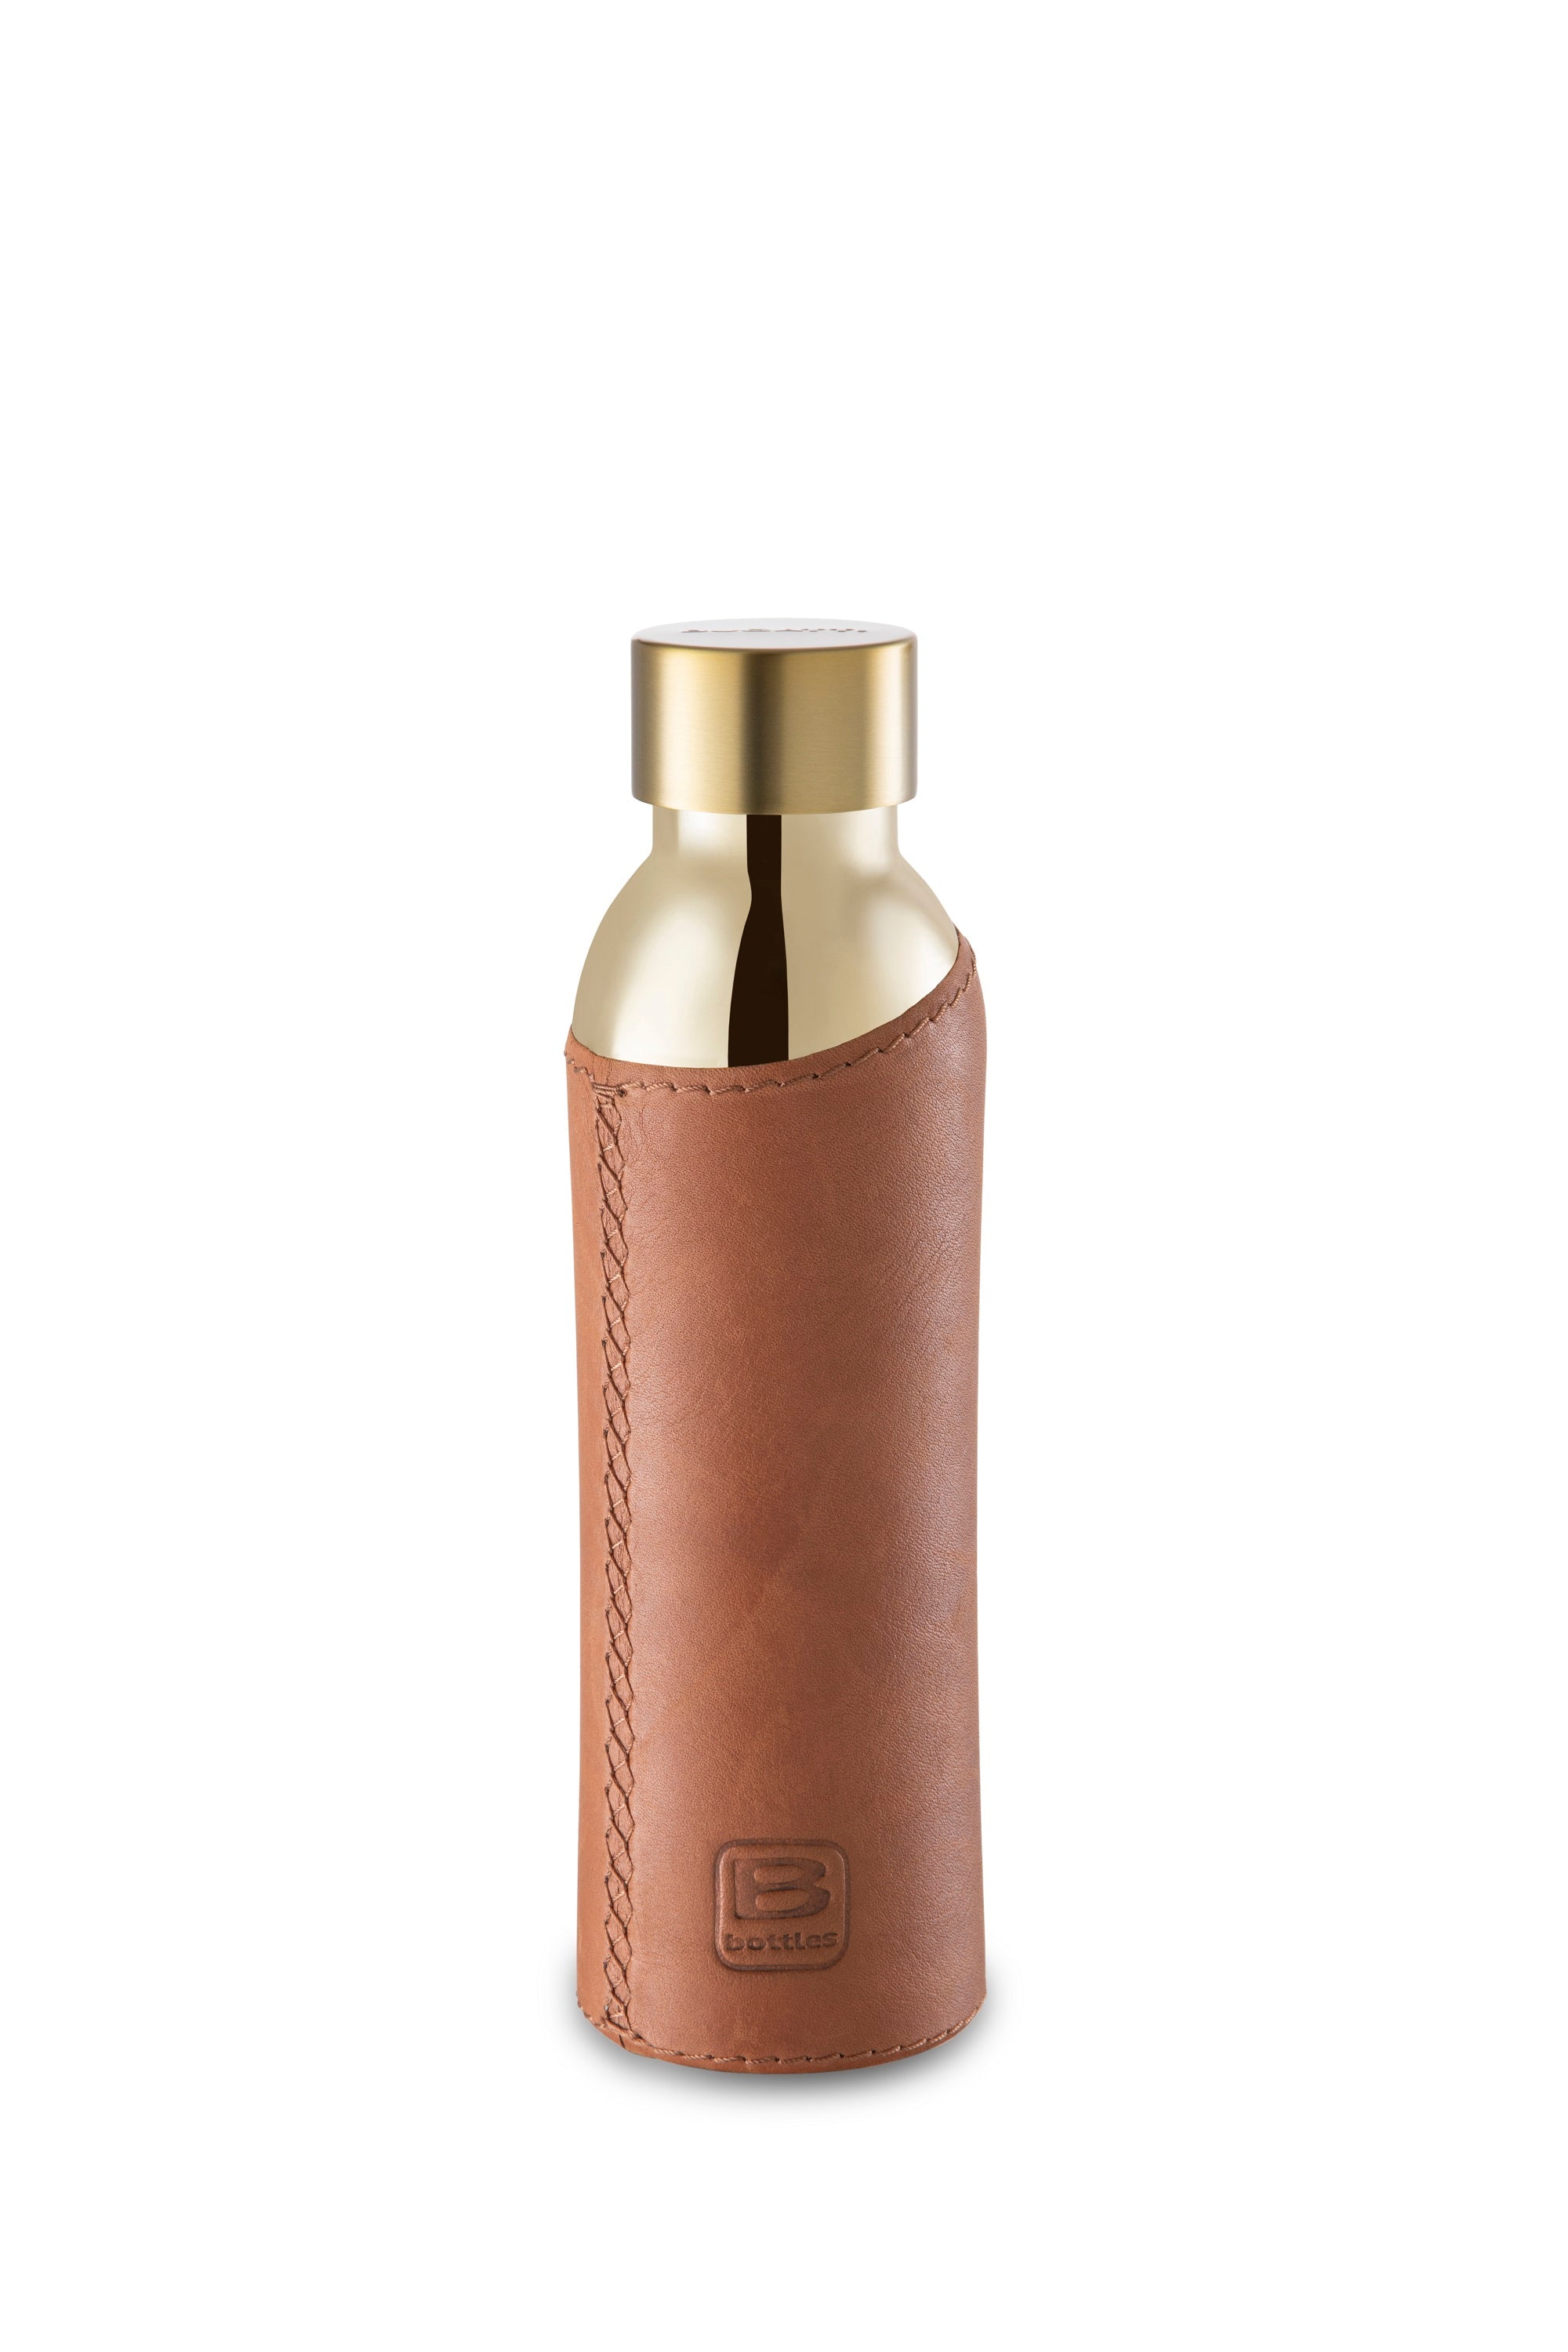 Bugatti B Bottles Gold Thermal Bottle 500 ML with Vintage Cognac Leather Cover